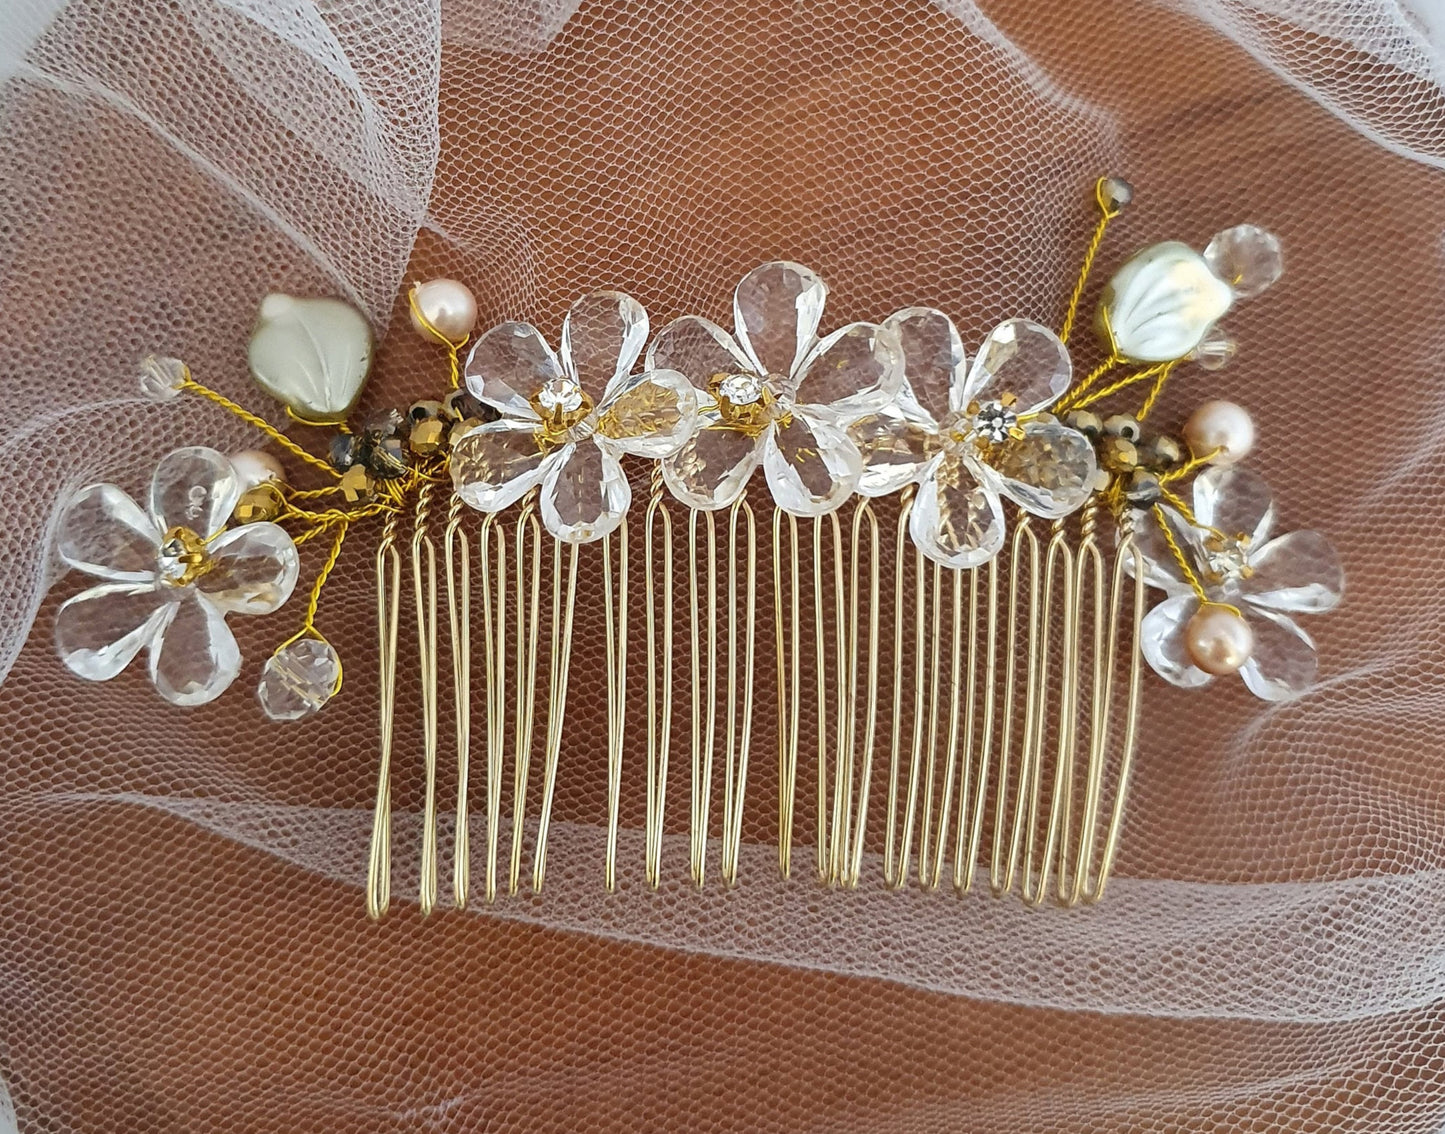 Handmade bridal comb with pearls and drop stones - elegant hair accessory for weddings, guests and parties, silver-colored metal comb